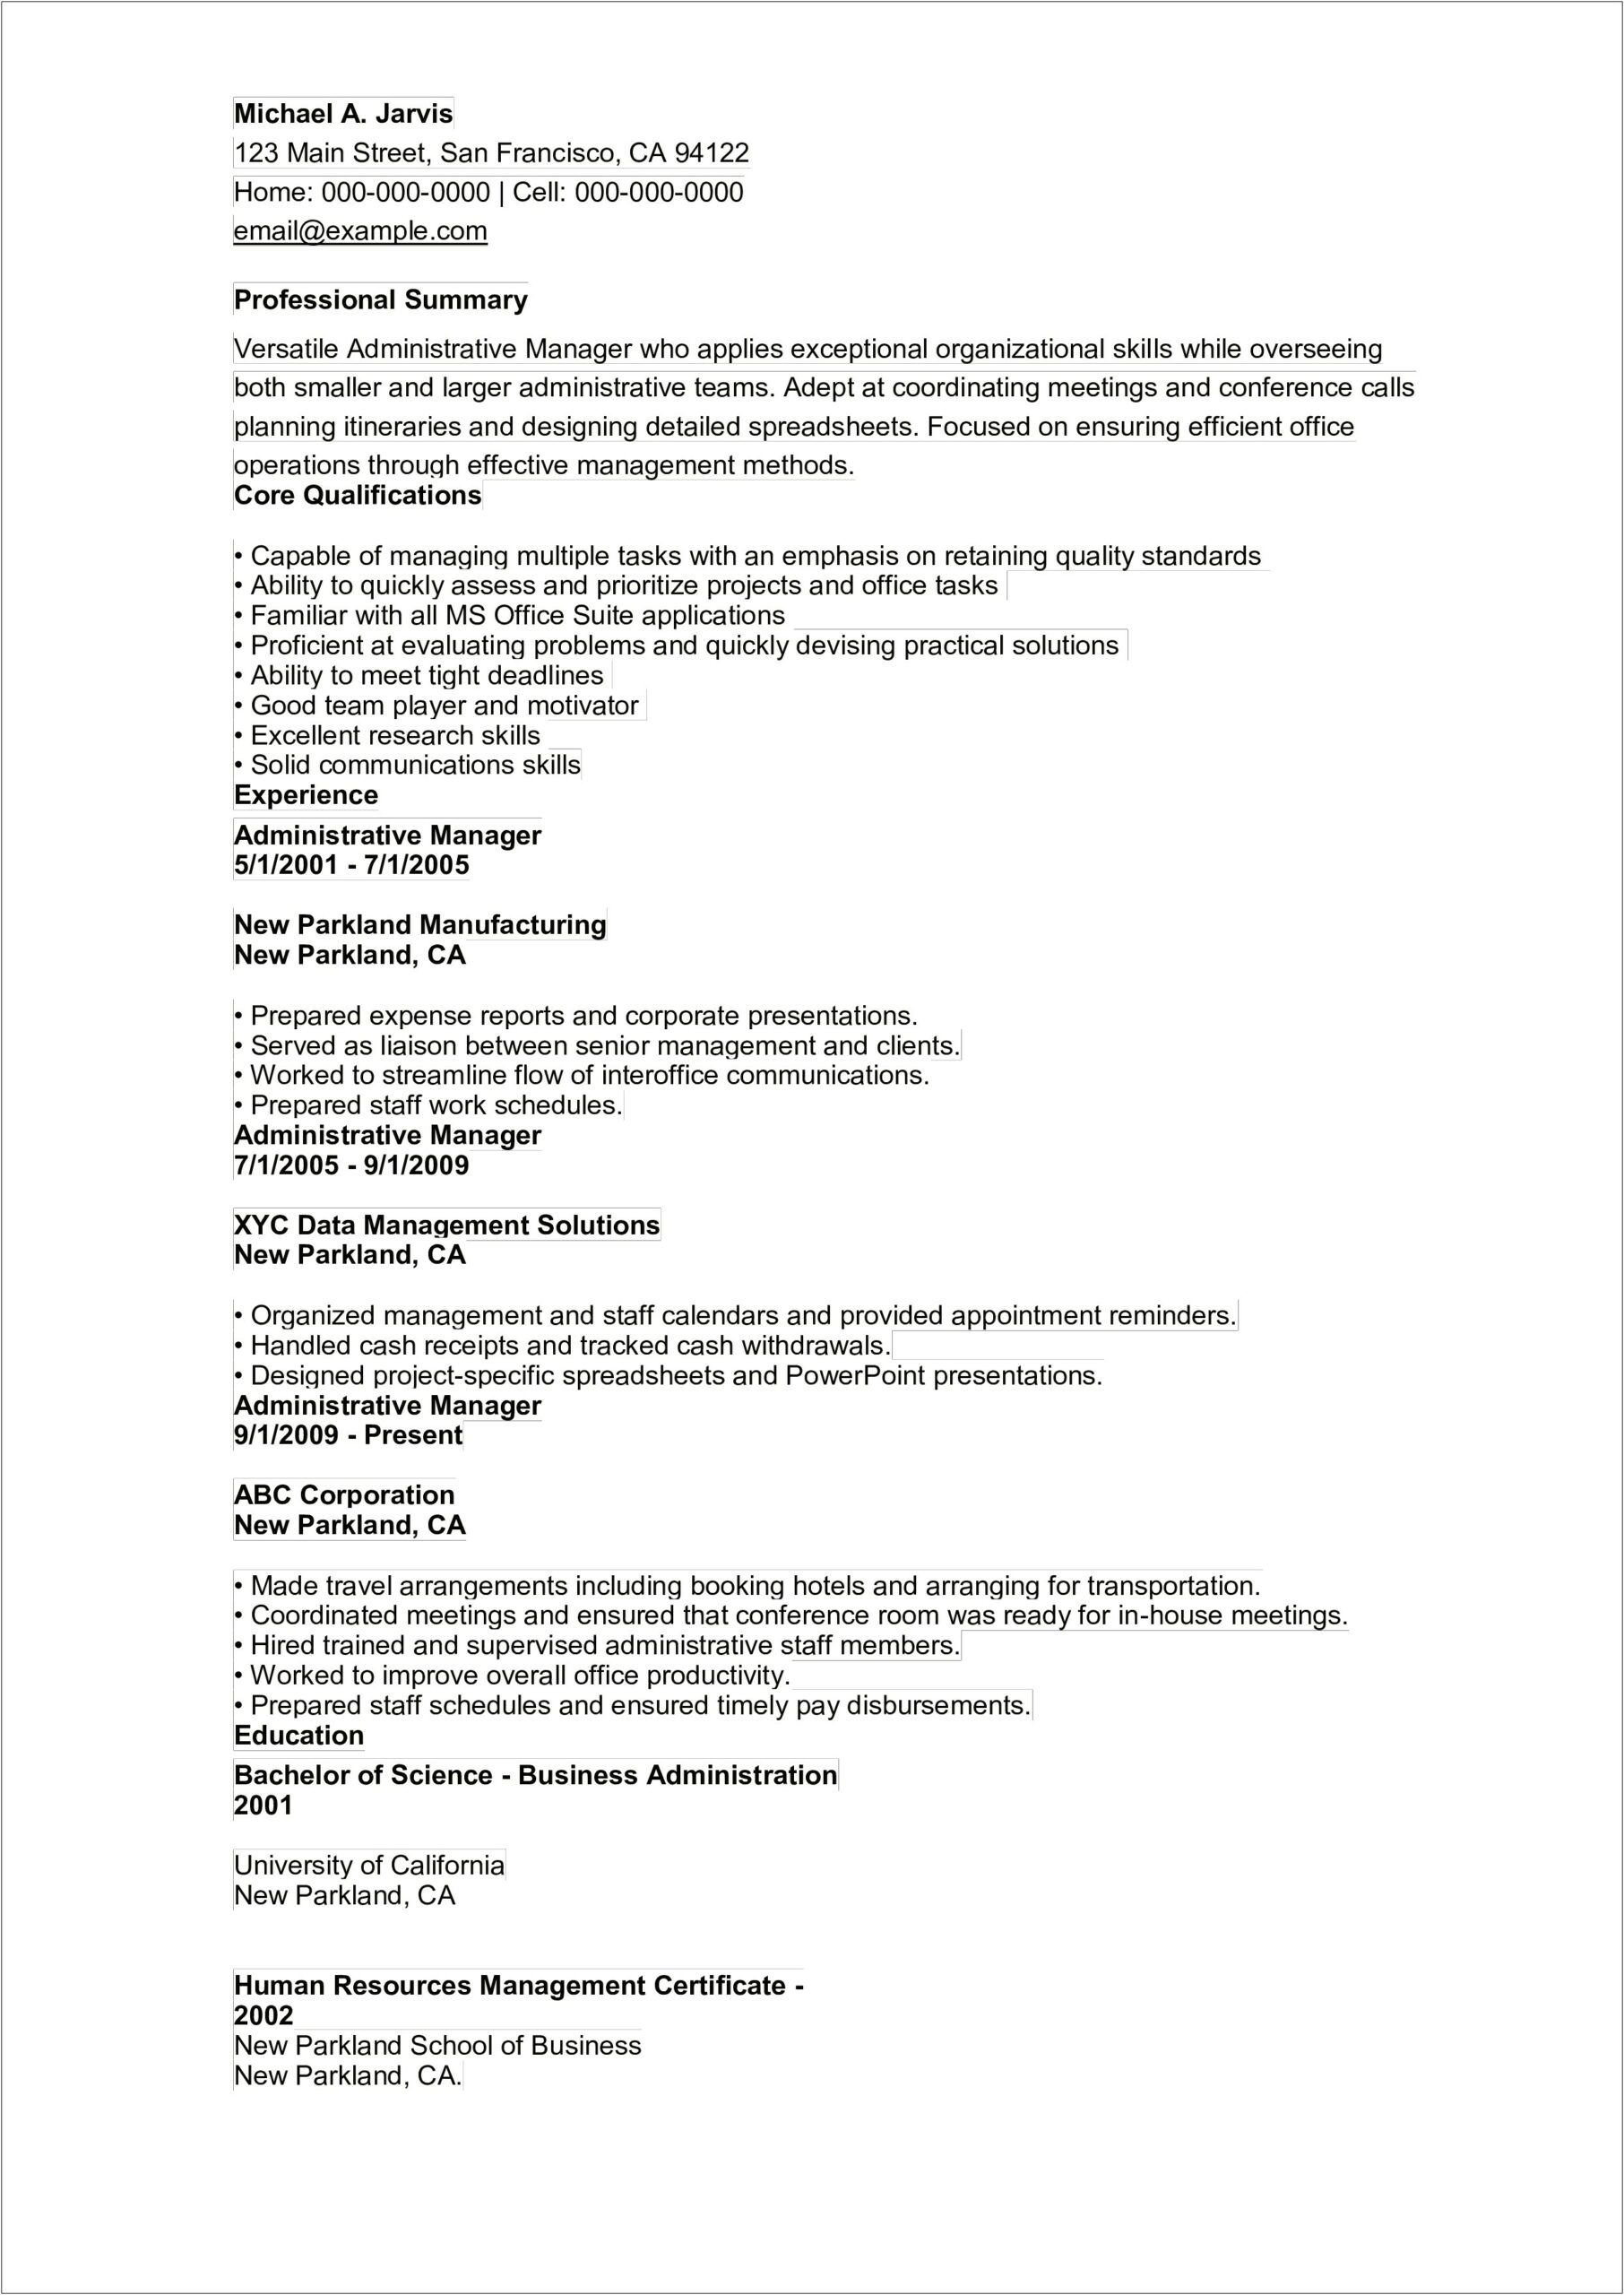 Resume For Office Manager In It Hr & Admin